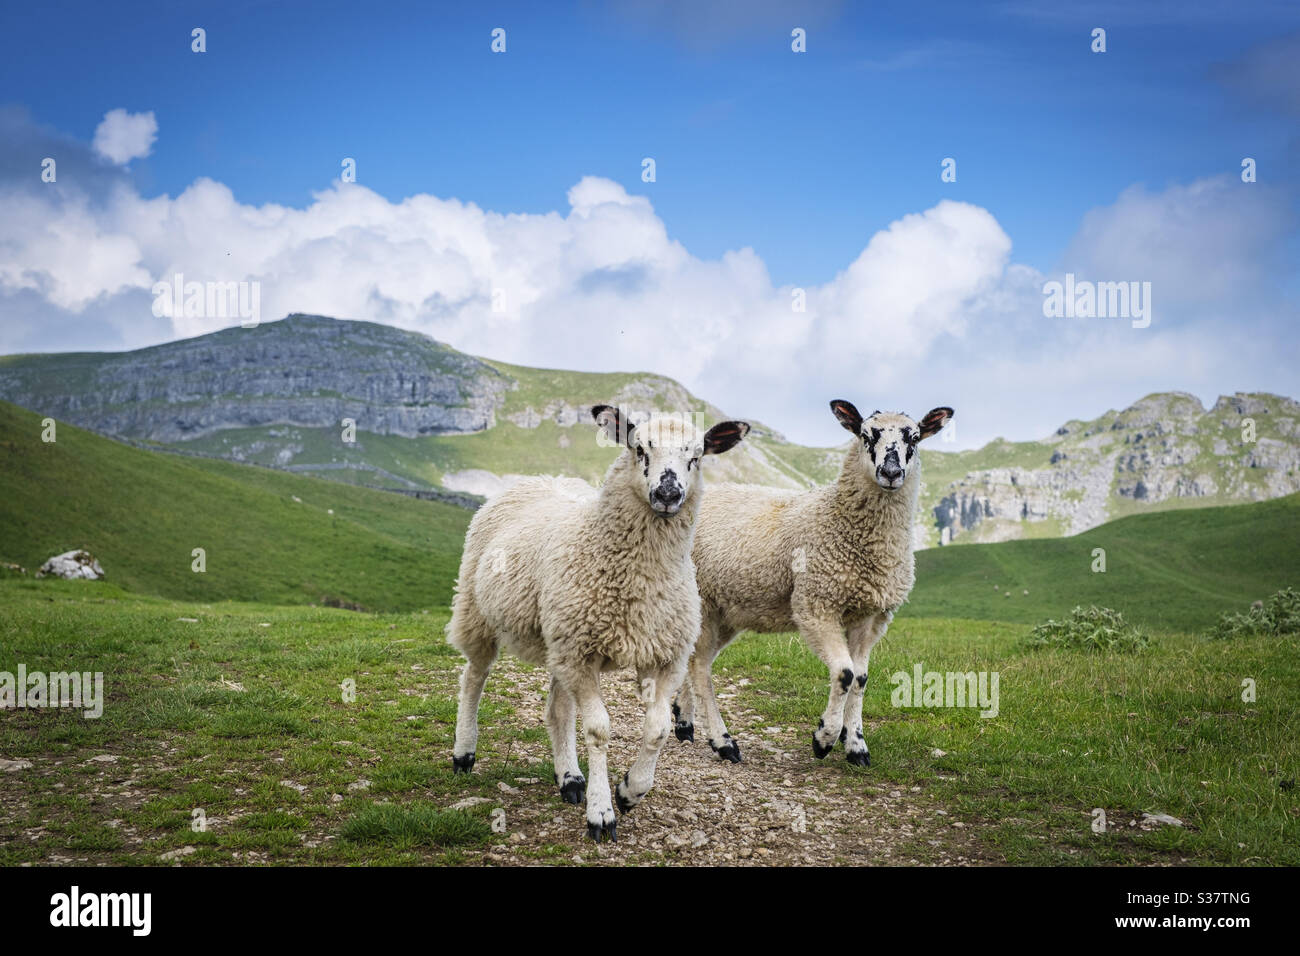 Lambs at Attermire Scar, Near Settle, Yorkshire Dales, UK Stock Photo